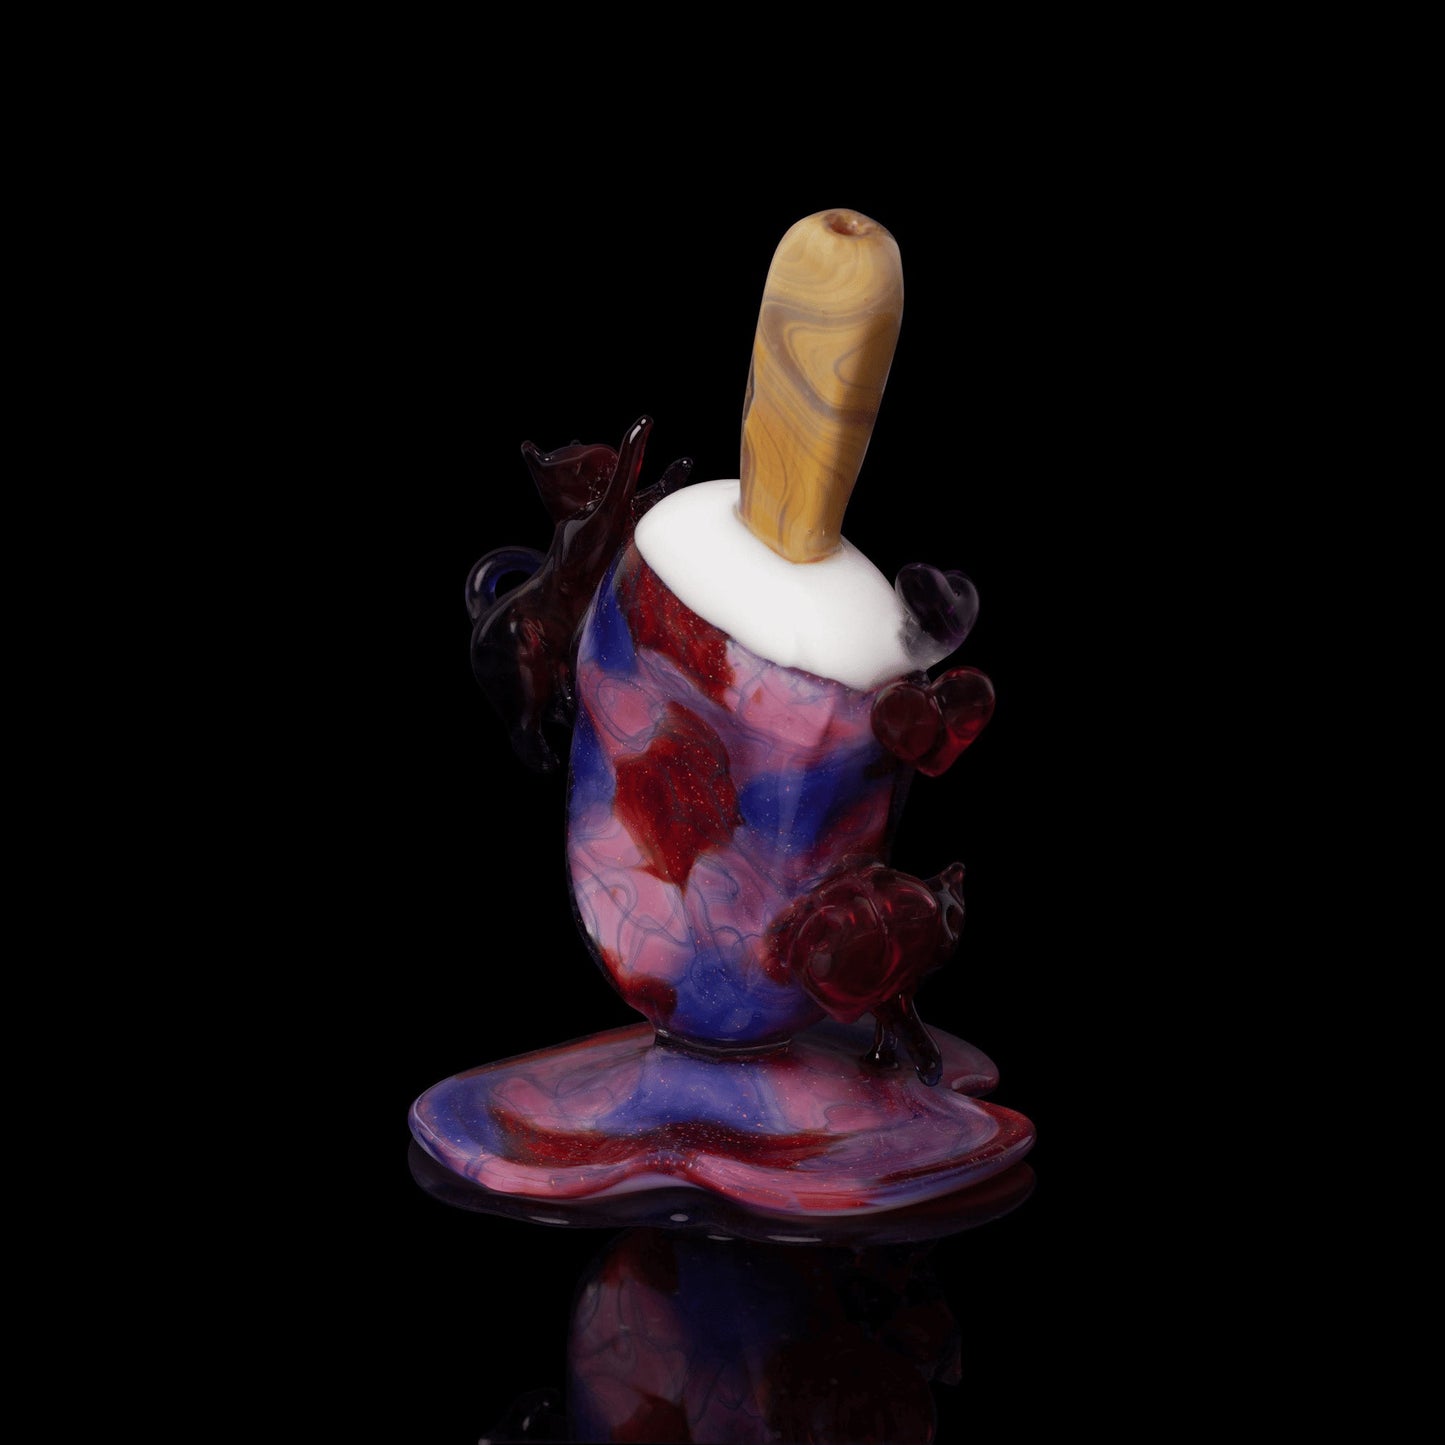 artisan-crafted design of the Collab Popsicle Rig by Sakibomb Hackysacky x Scomo Moanet (Scribble Season 2022)